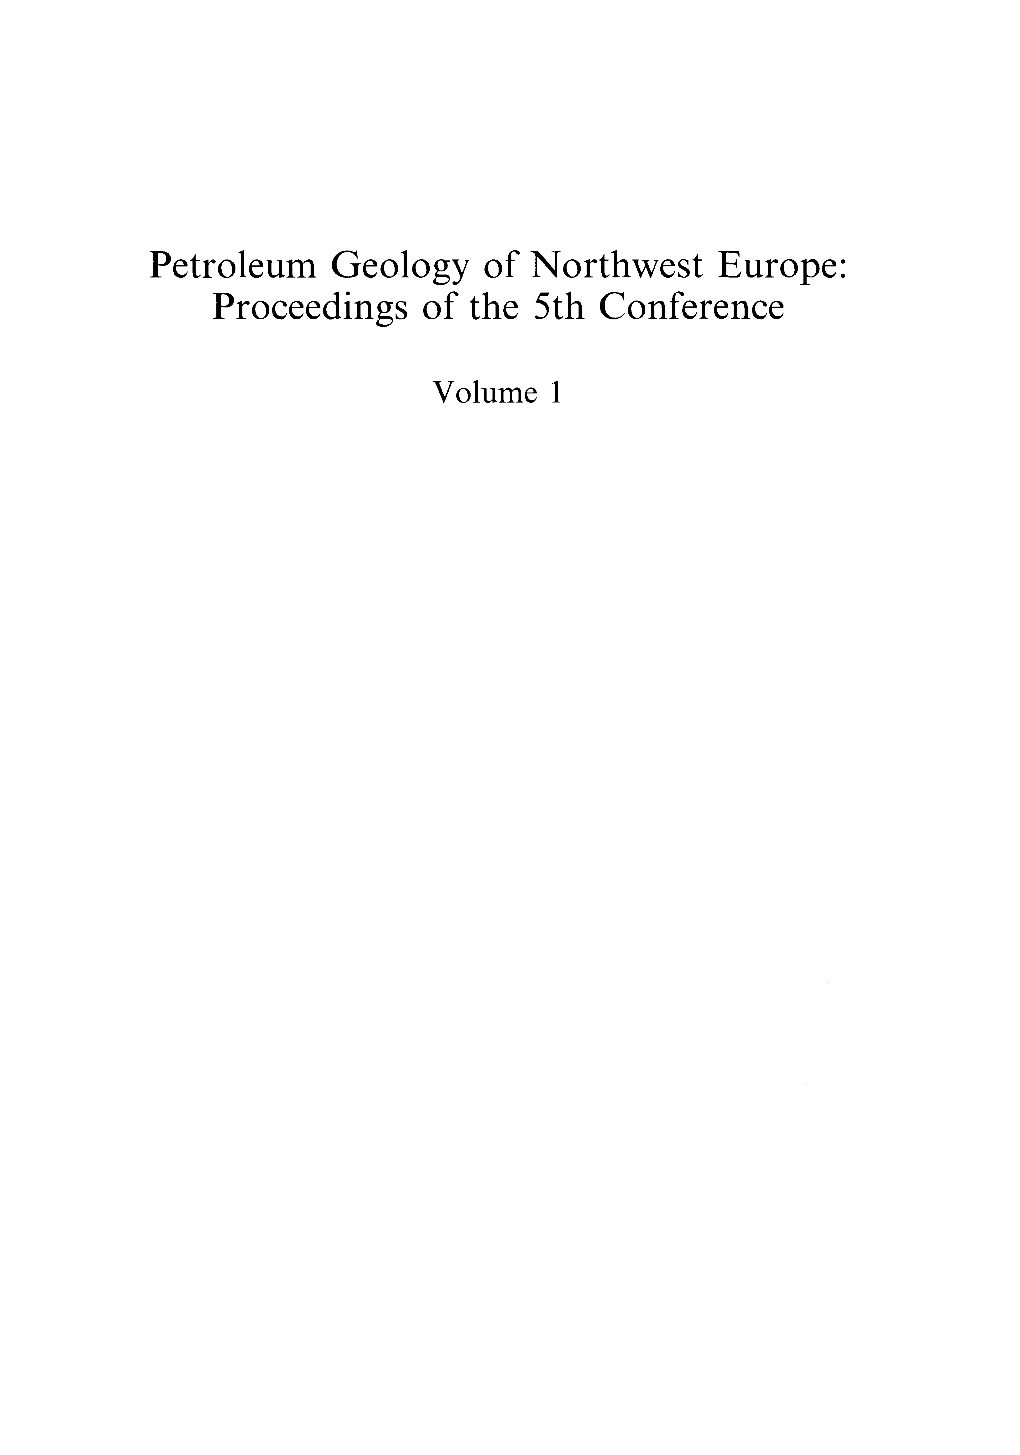 Petroleum Geology of Northwest Europe: Proceedings of the 5Th Conference